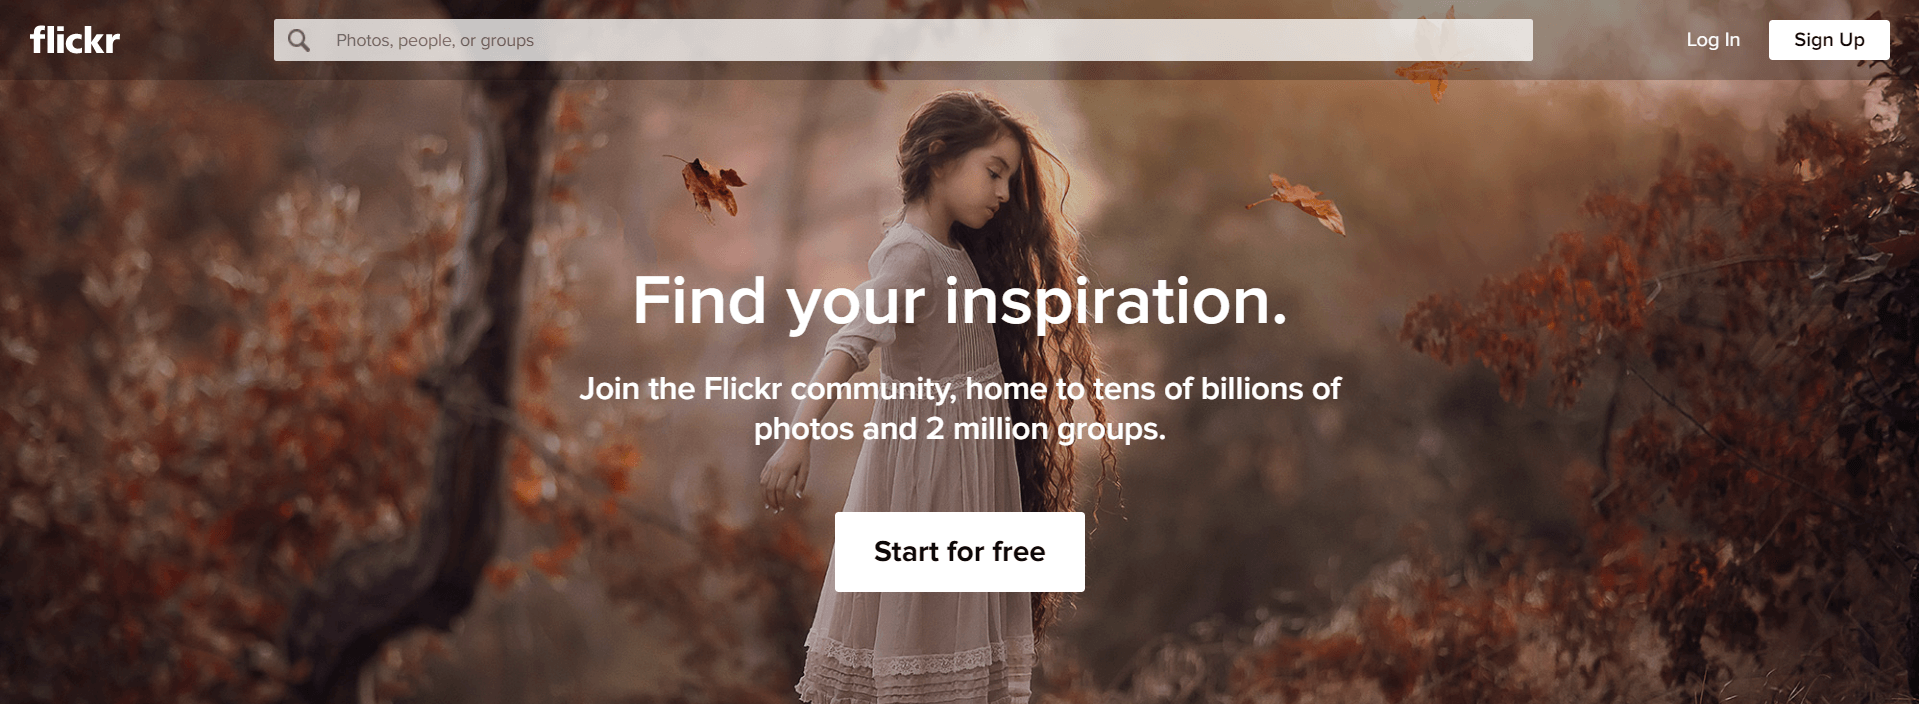 Flickr - Best Image and Video Sharing Site